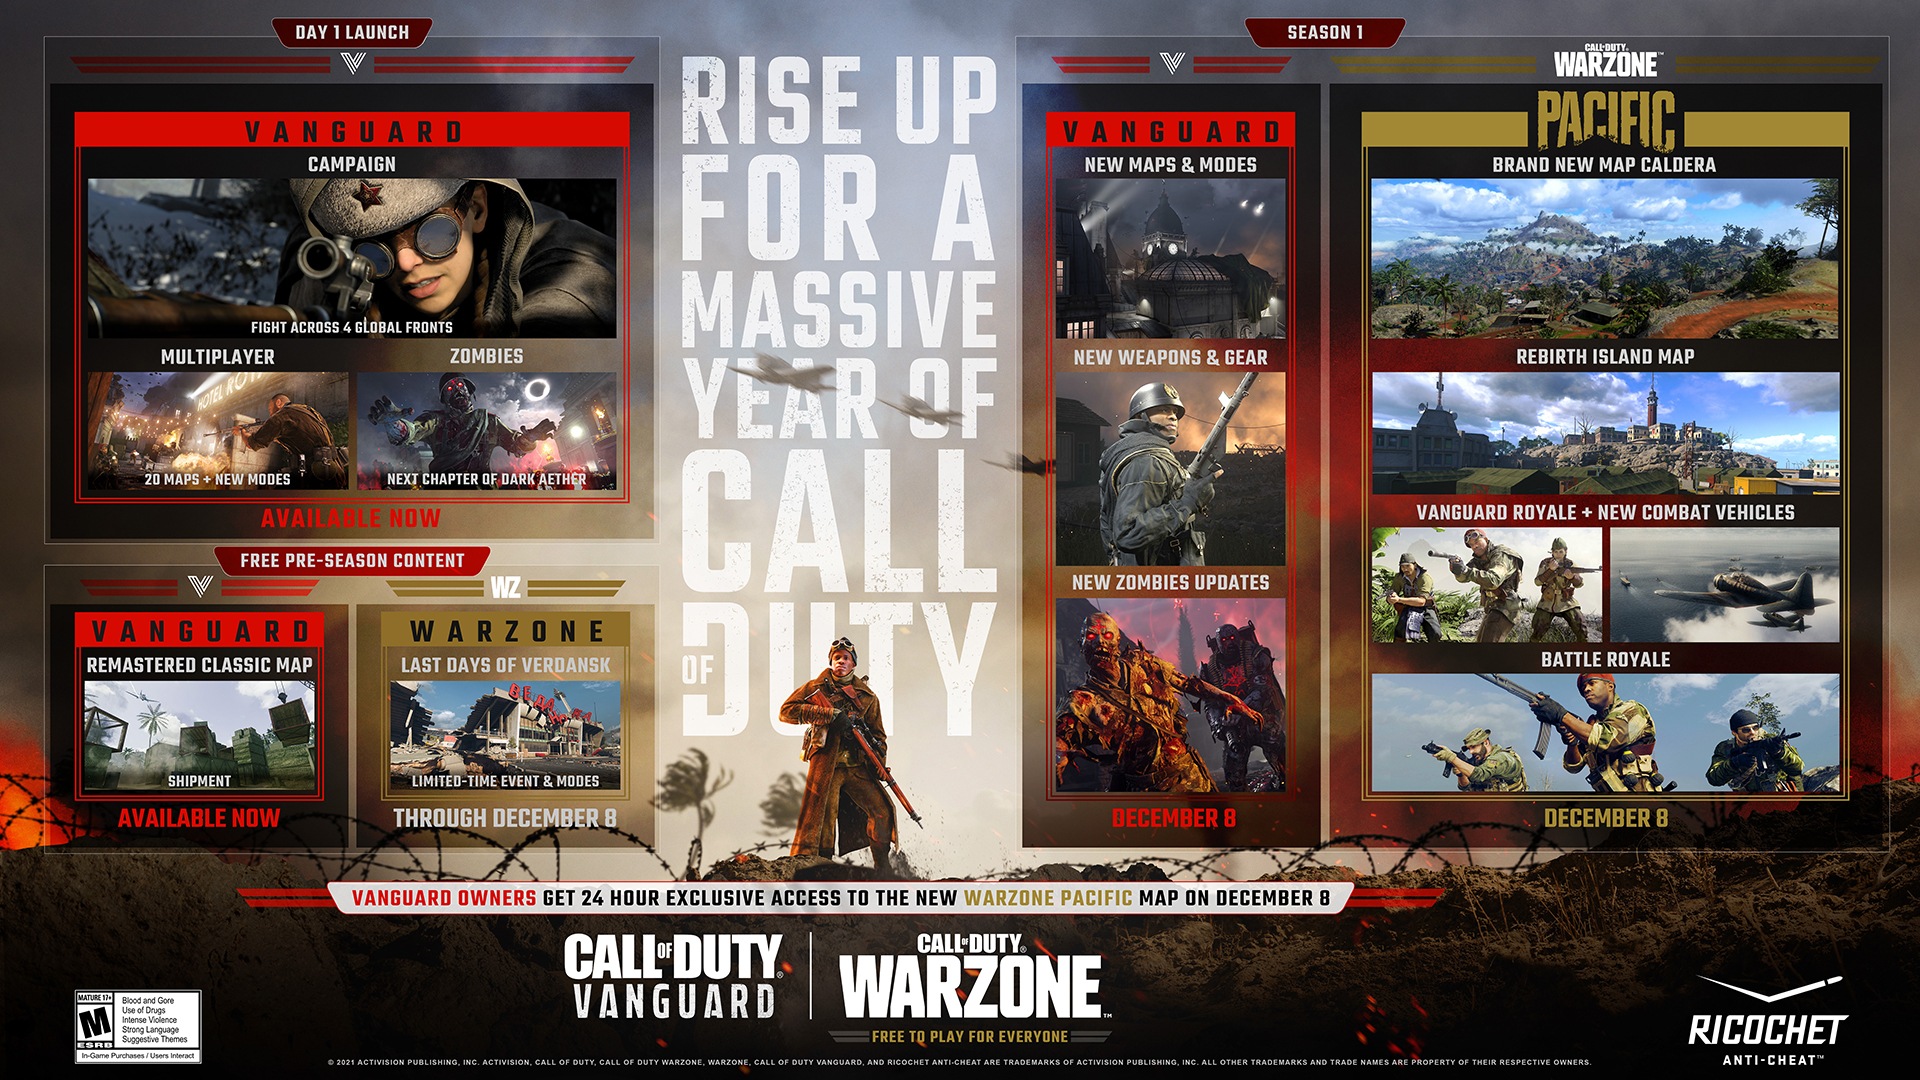 Call of Duty: Vanguard PC Trailer, Specs, and Preloading